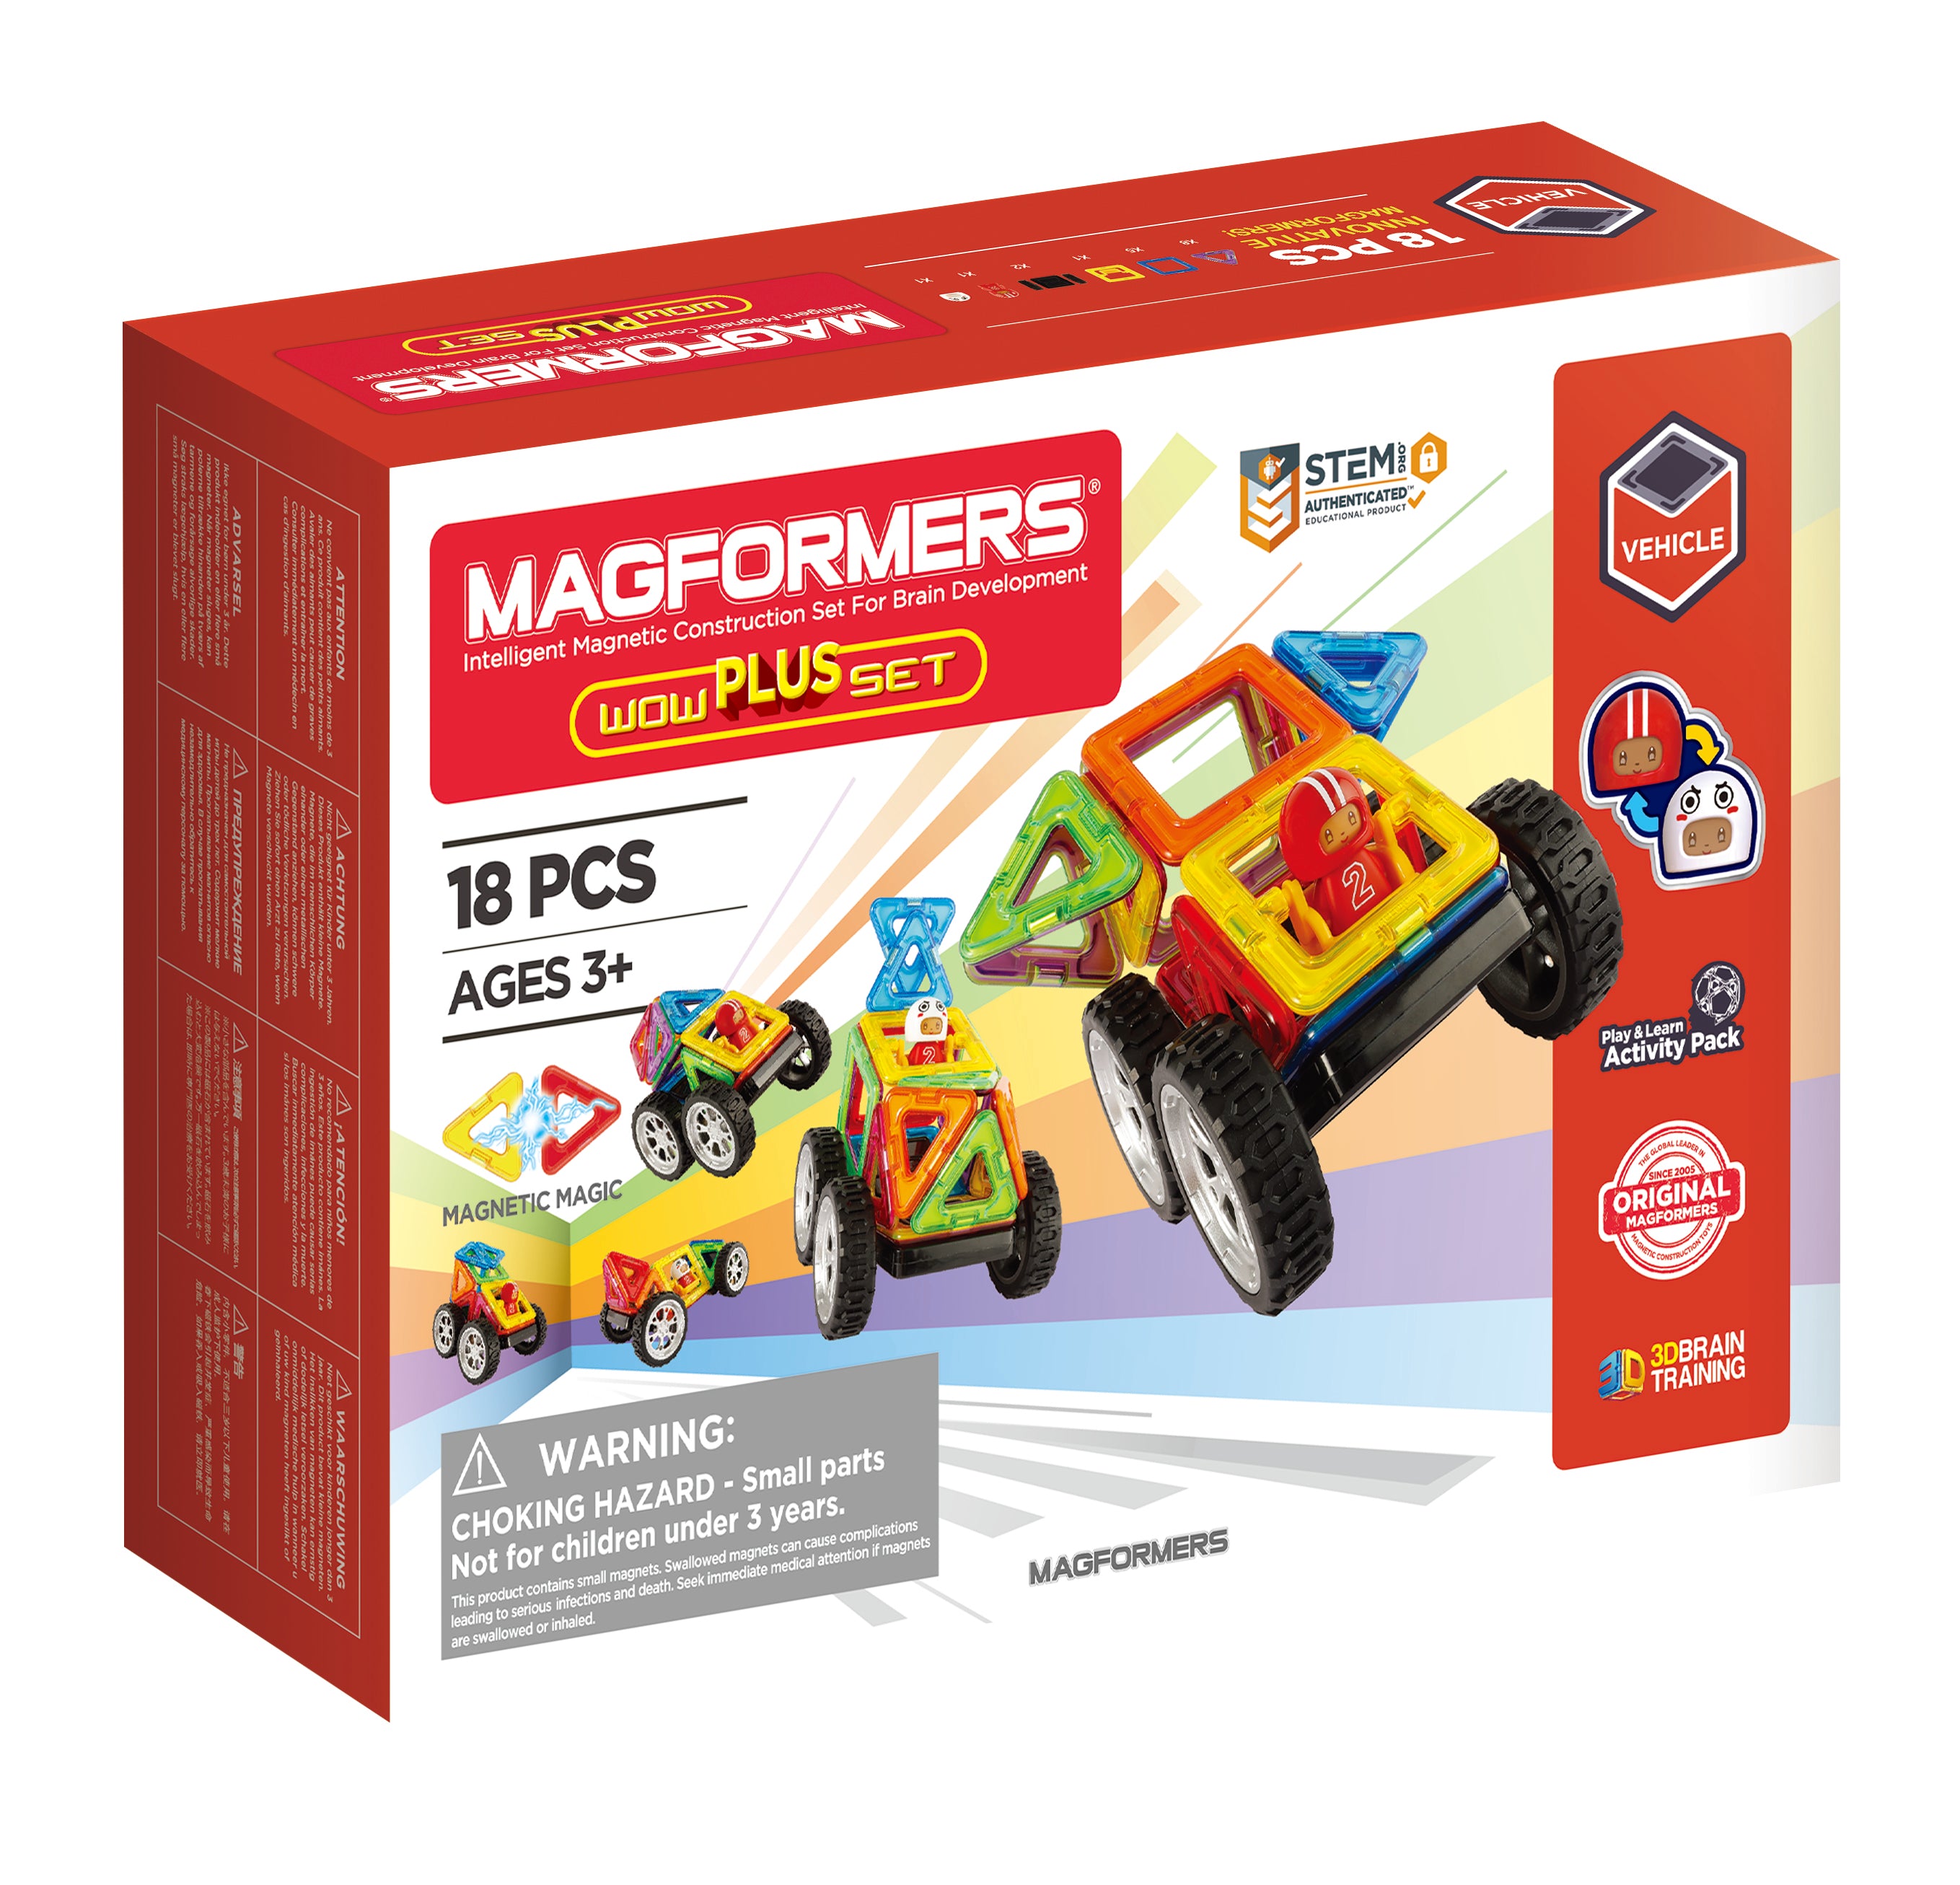 Overlevelse pension Es Magformers Wow Plus 18Pc Magnetic Construction Educational STEM Toy –  Magformers US